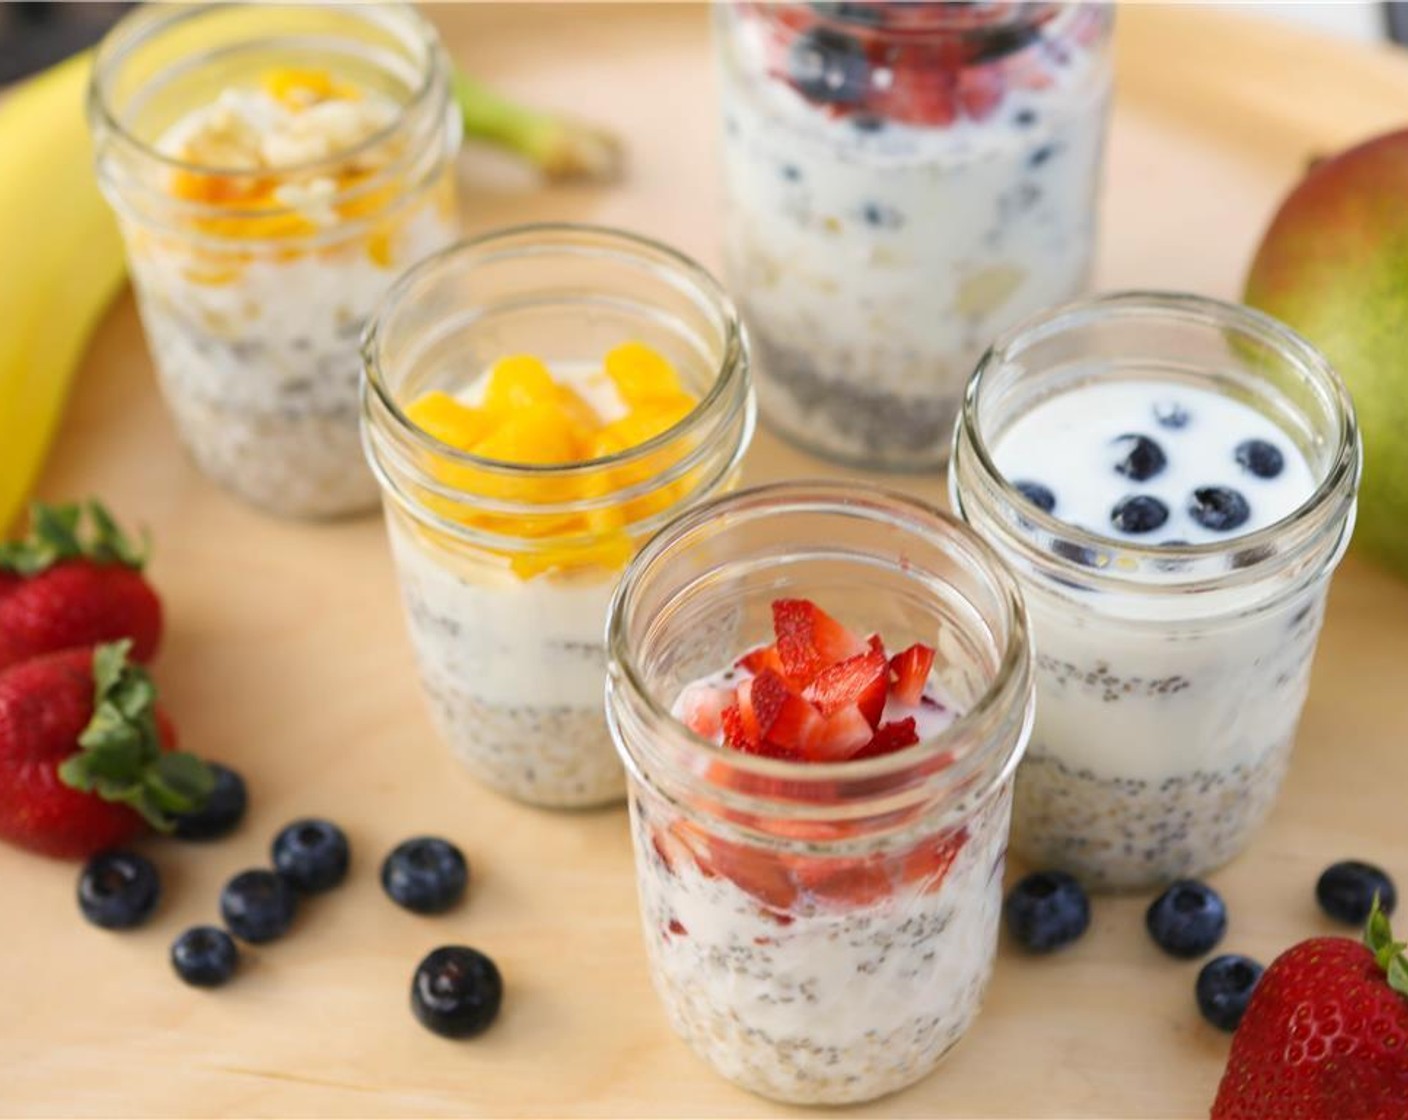 step 1 Place Old Fashioned Rolled Oats (1/4 cup), Chia Seeds (1/2 Tbsp), Milk (1/2 cup), Mangoes (to taste), Fresh Blueberries (to taste), Raisins (to taste), Ground Cinnamon (to taste), Honey (to taste), and Vanilla Extract (to taste) in a half-pint mason jar.